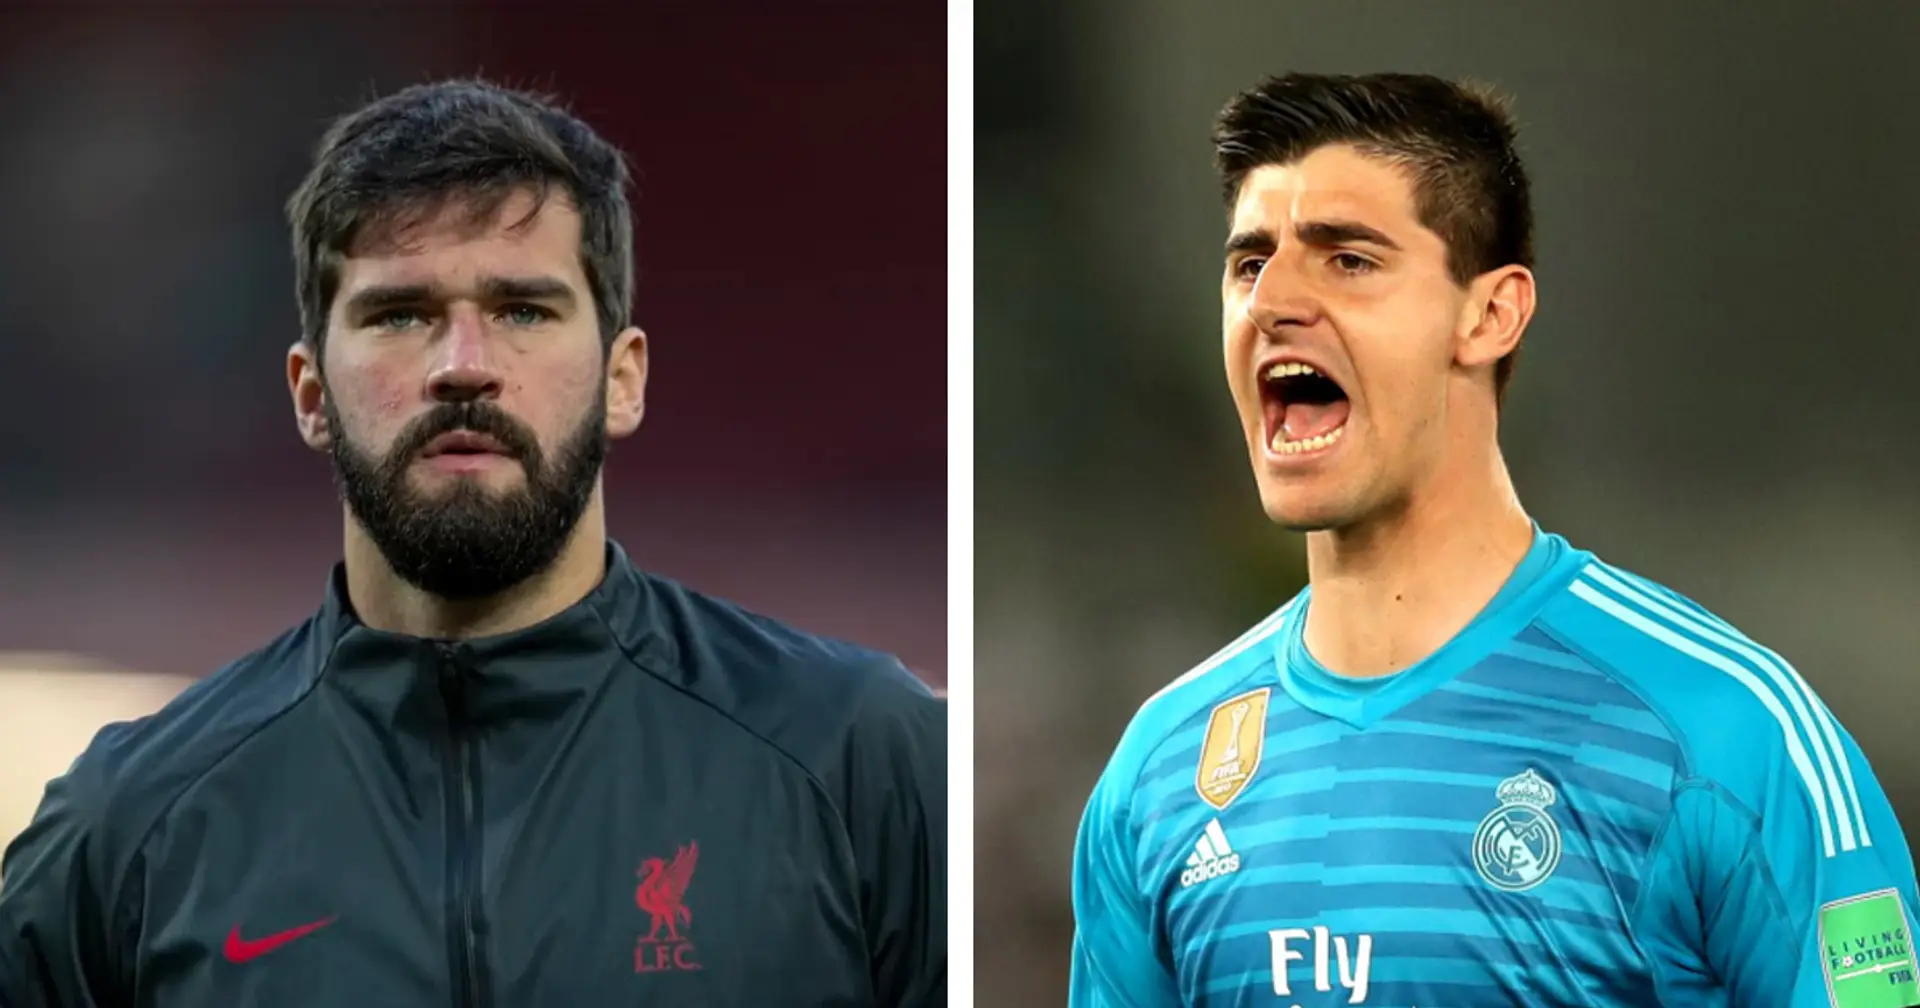 World's top 10 goalkeepers revealed - Alisson not included in top 5